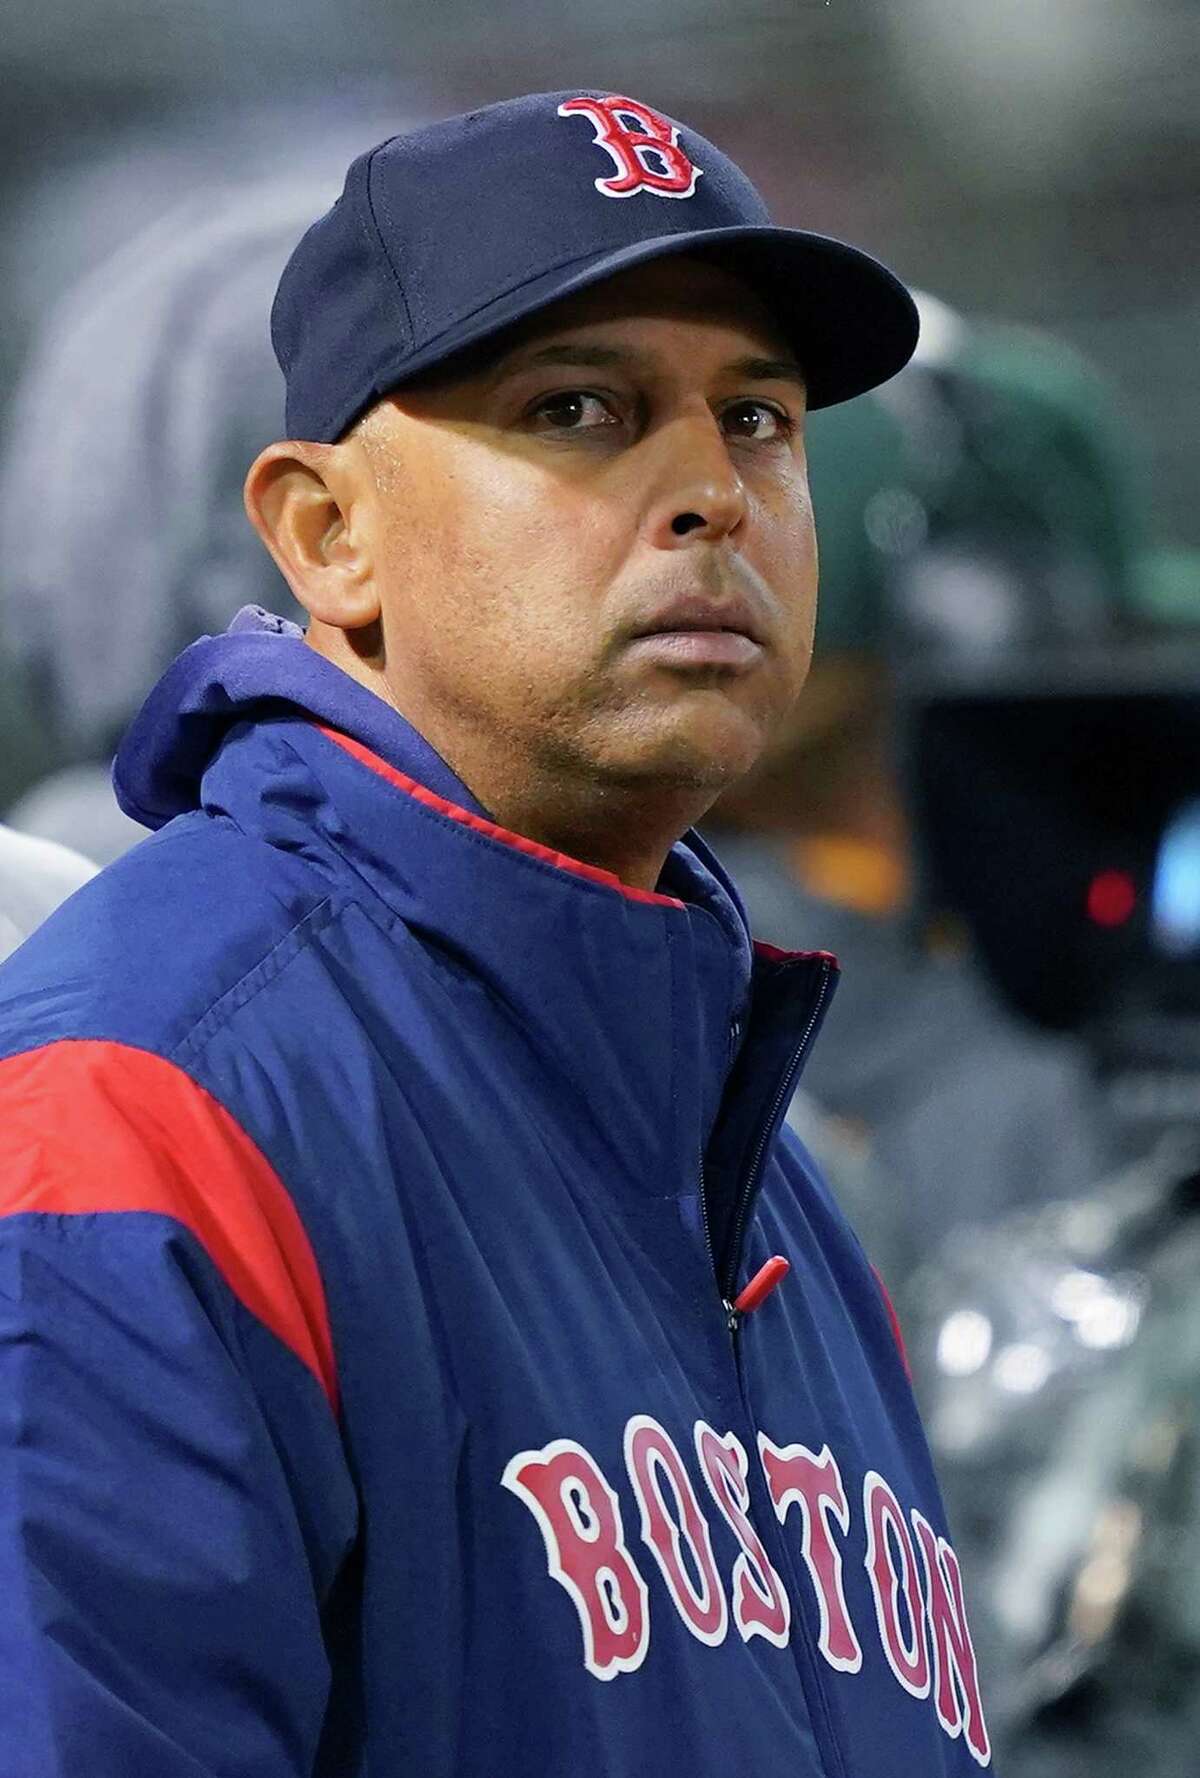 Alex Cora Ousted by Red Sox After Sign-Stealing Scandal - The New York Times